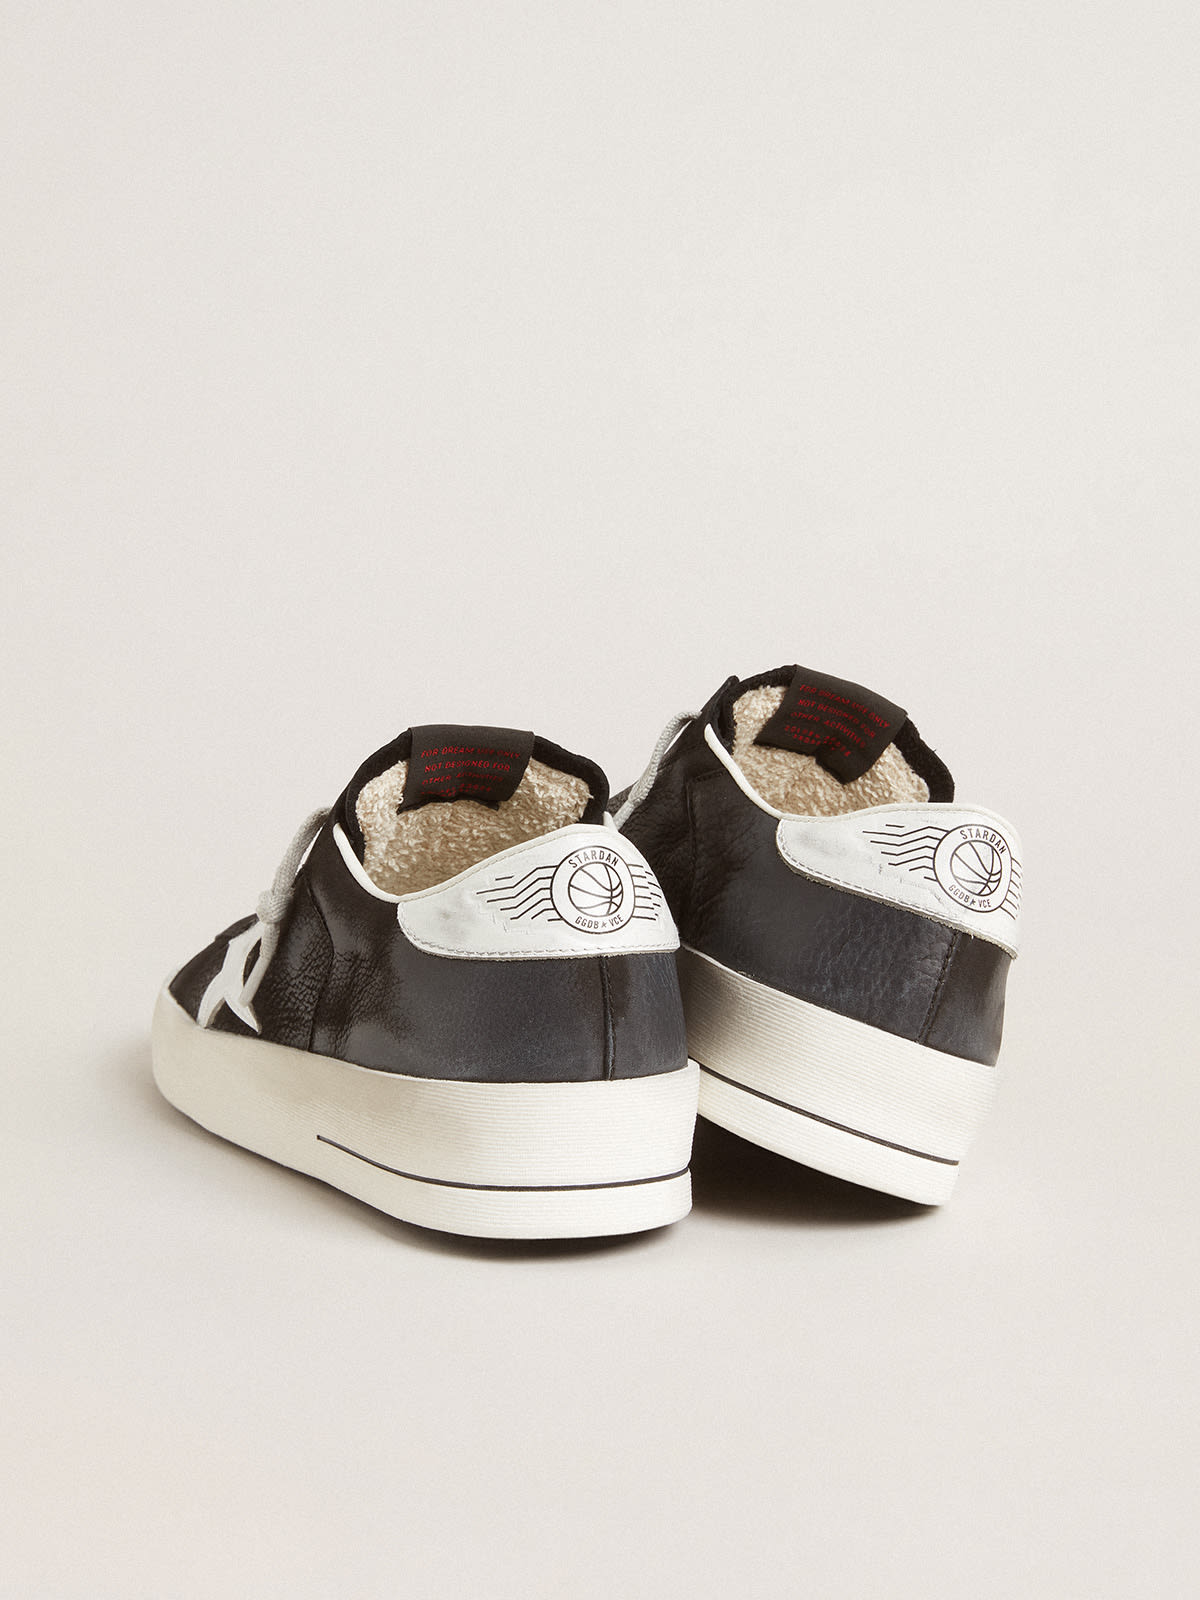 Golden Goose - Stardan in black nubuck and mesh with gray leather star and heel tab in 